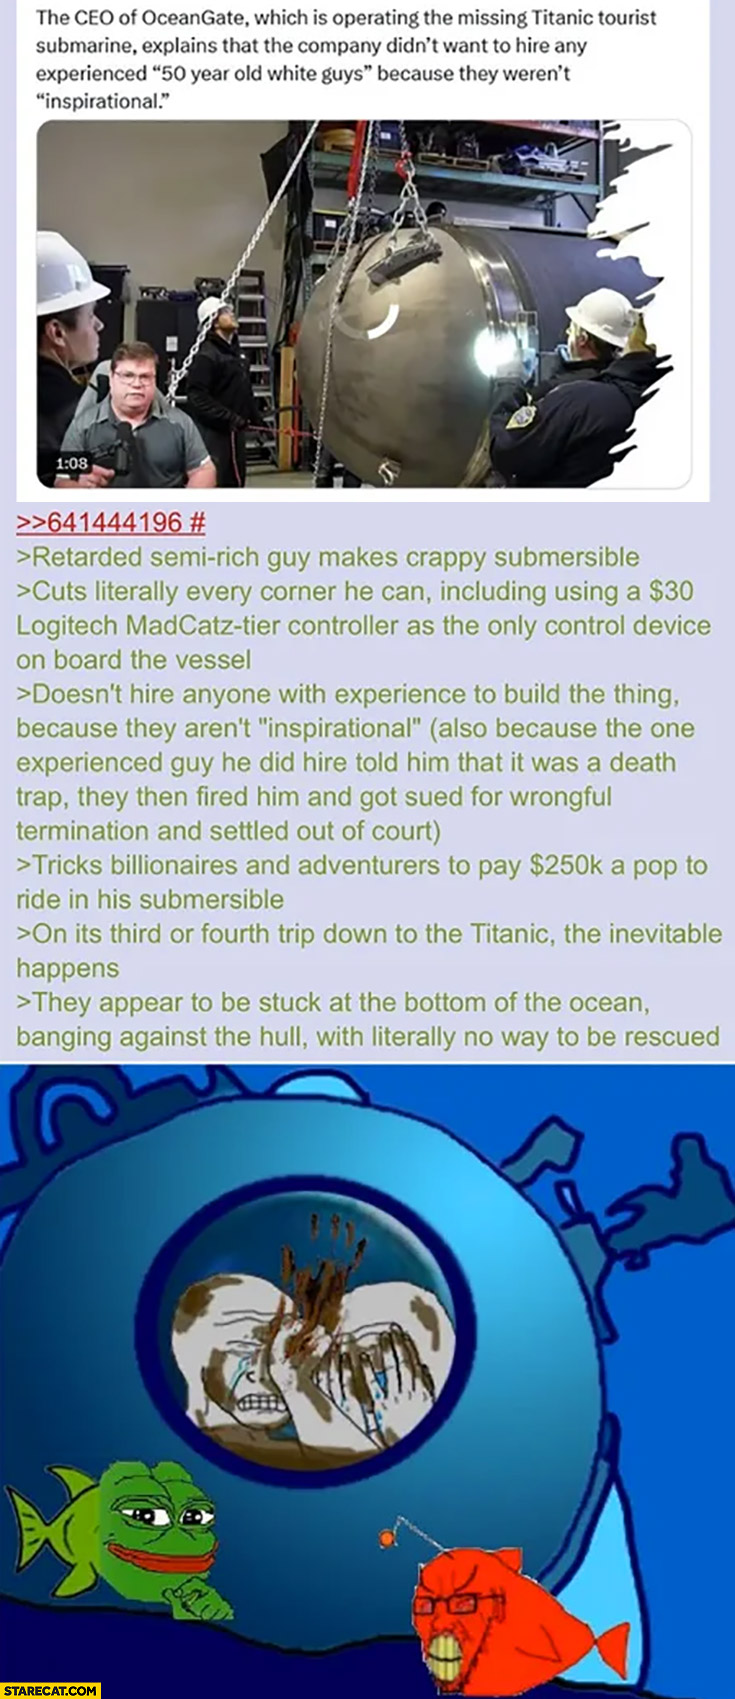 OceanGate Titan story retarded semi-rich guy makes crappy submersible cuts every corner 4chan post